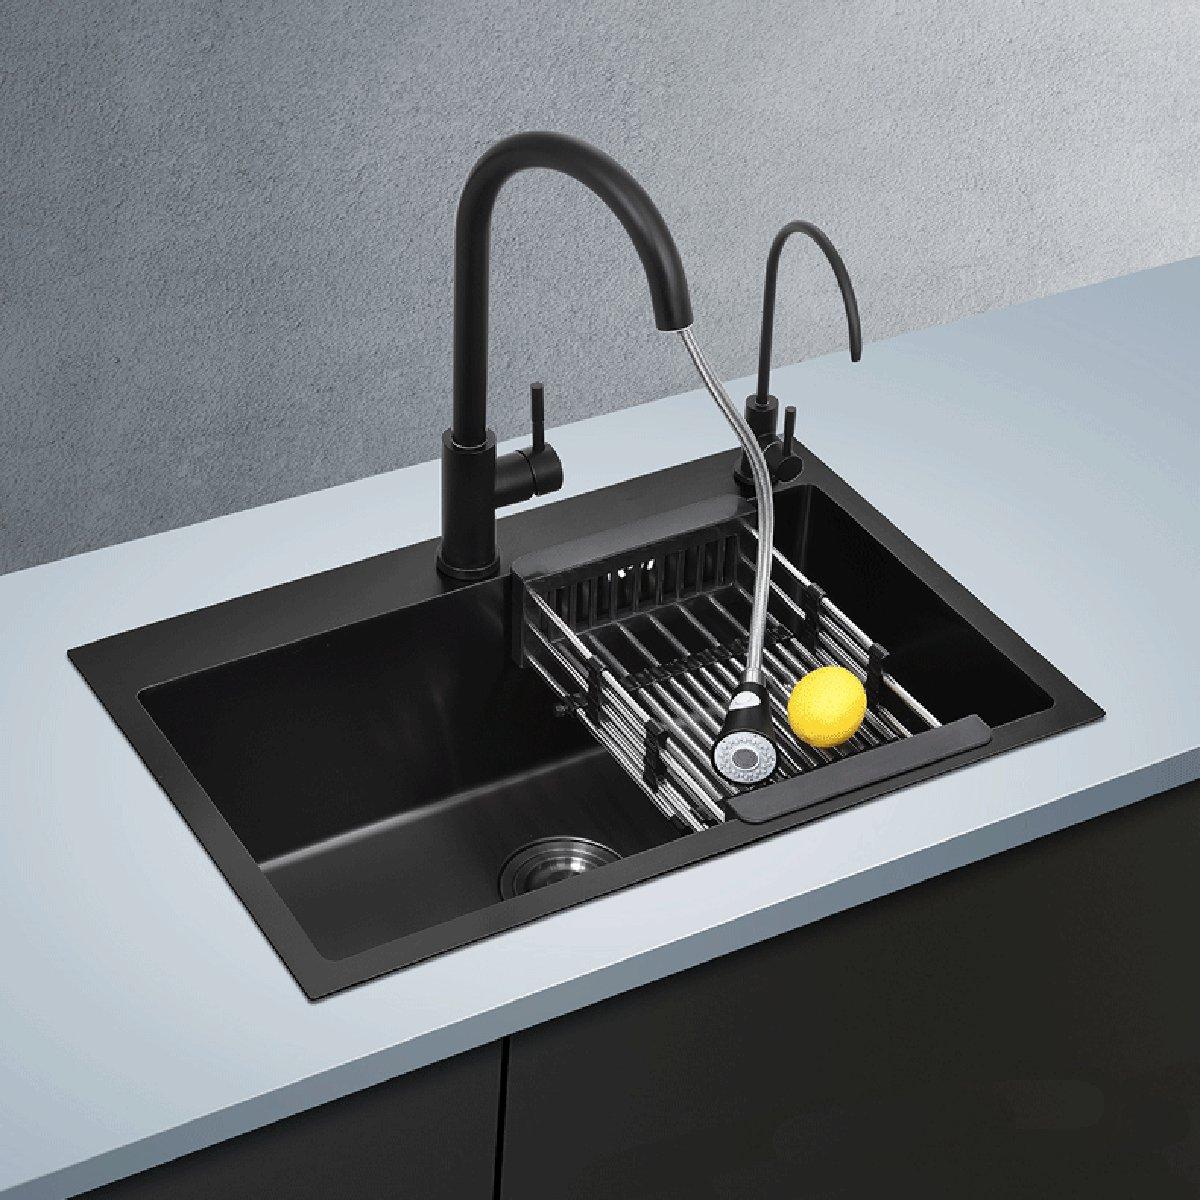 680x450mm Nano Stainless Steel Kitchen Black Sink Above Counter Stainless Steel Seamless Welding Collapsible